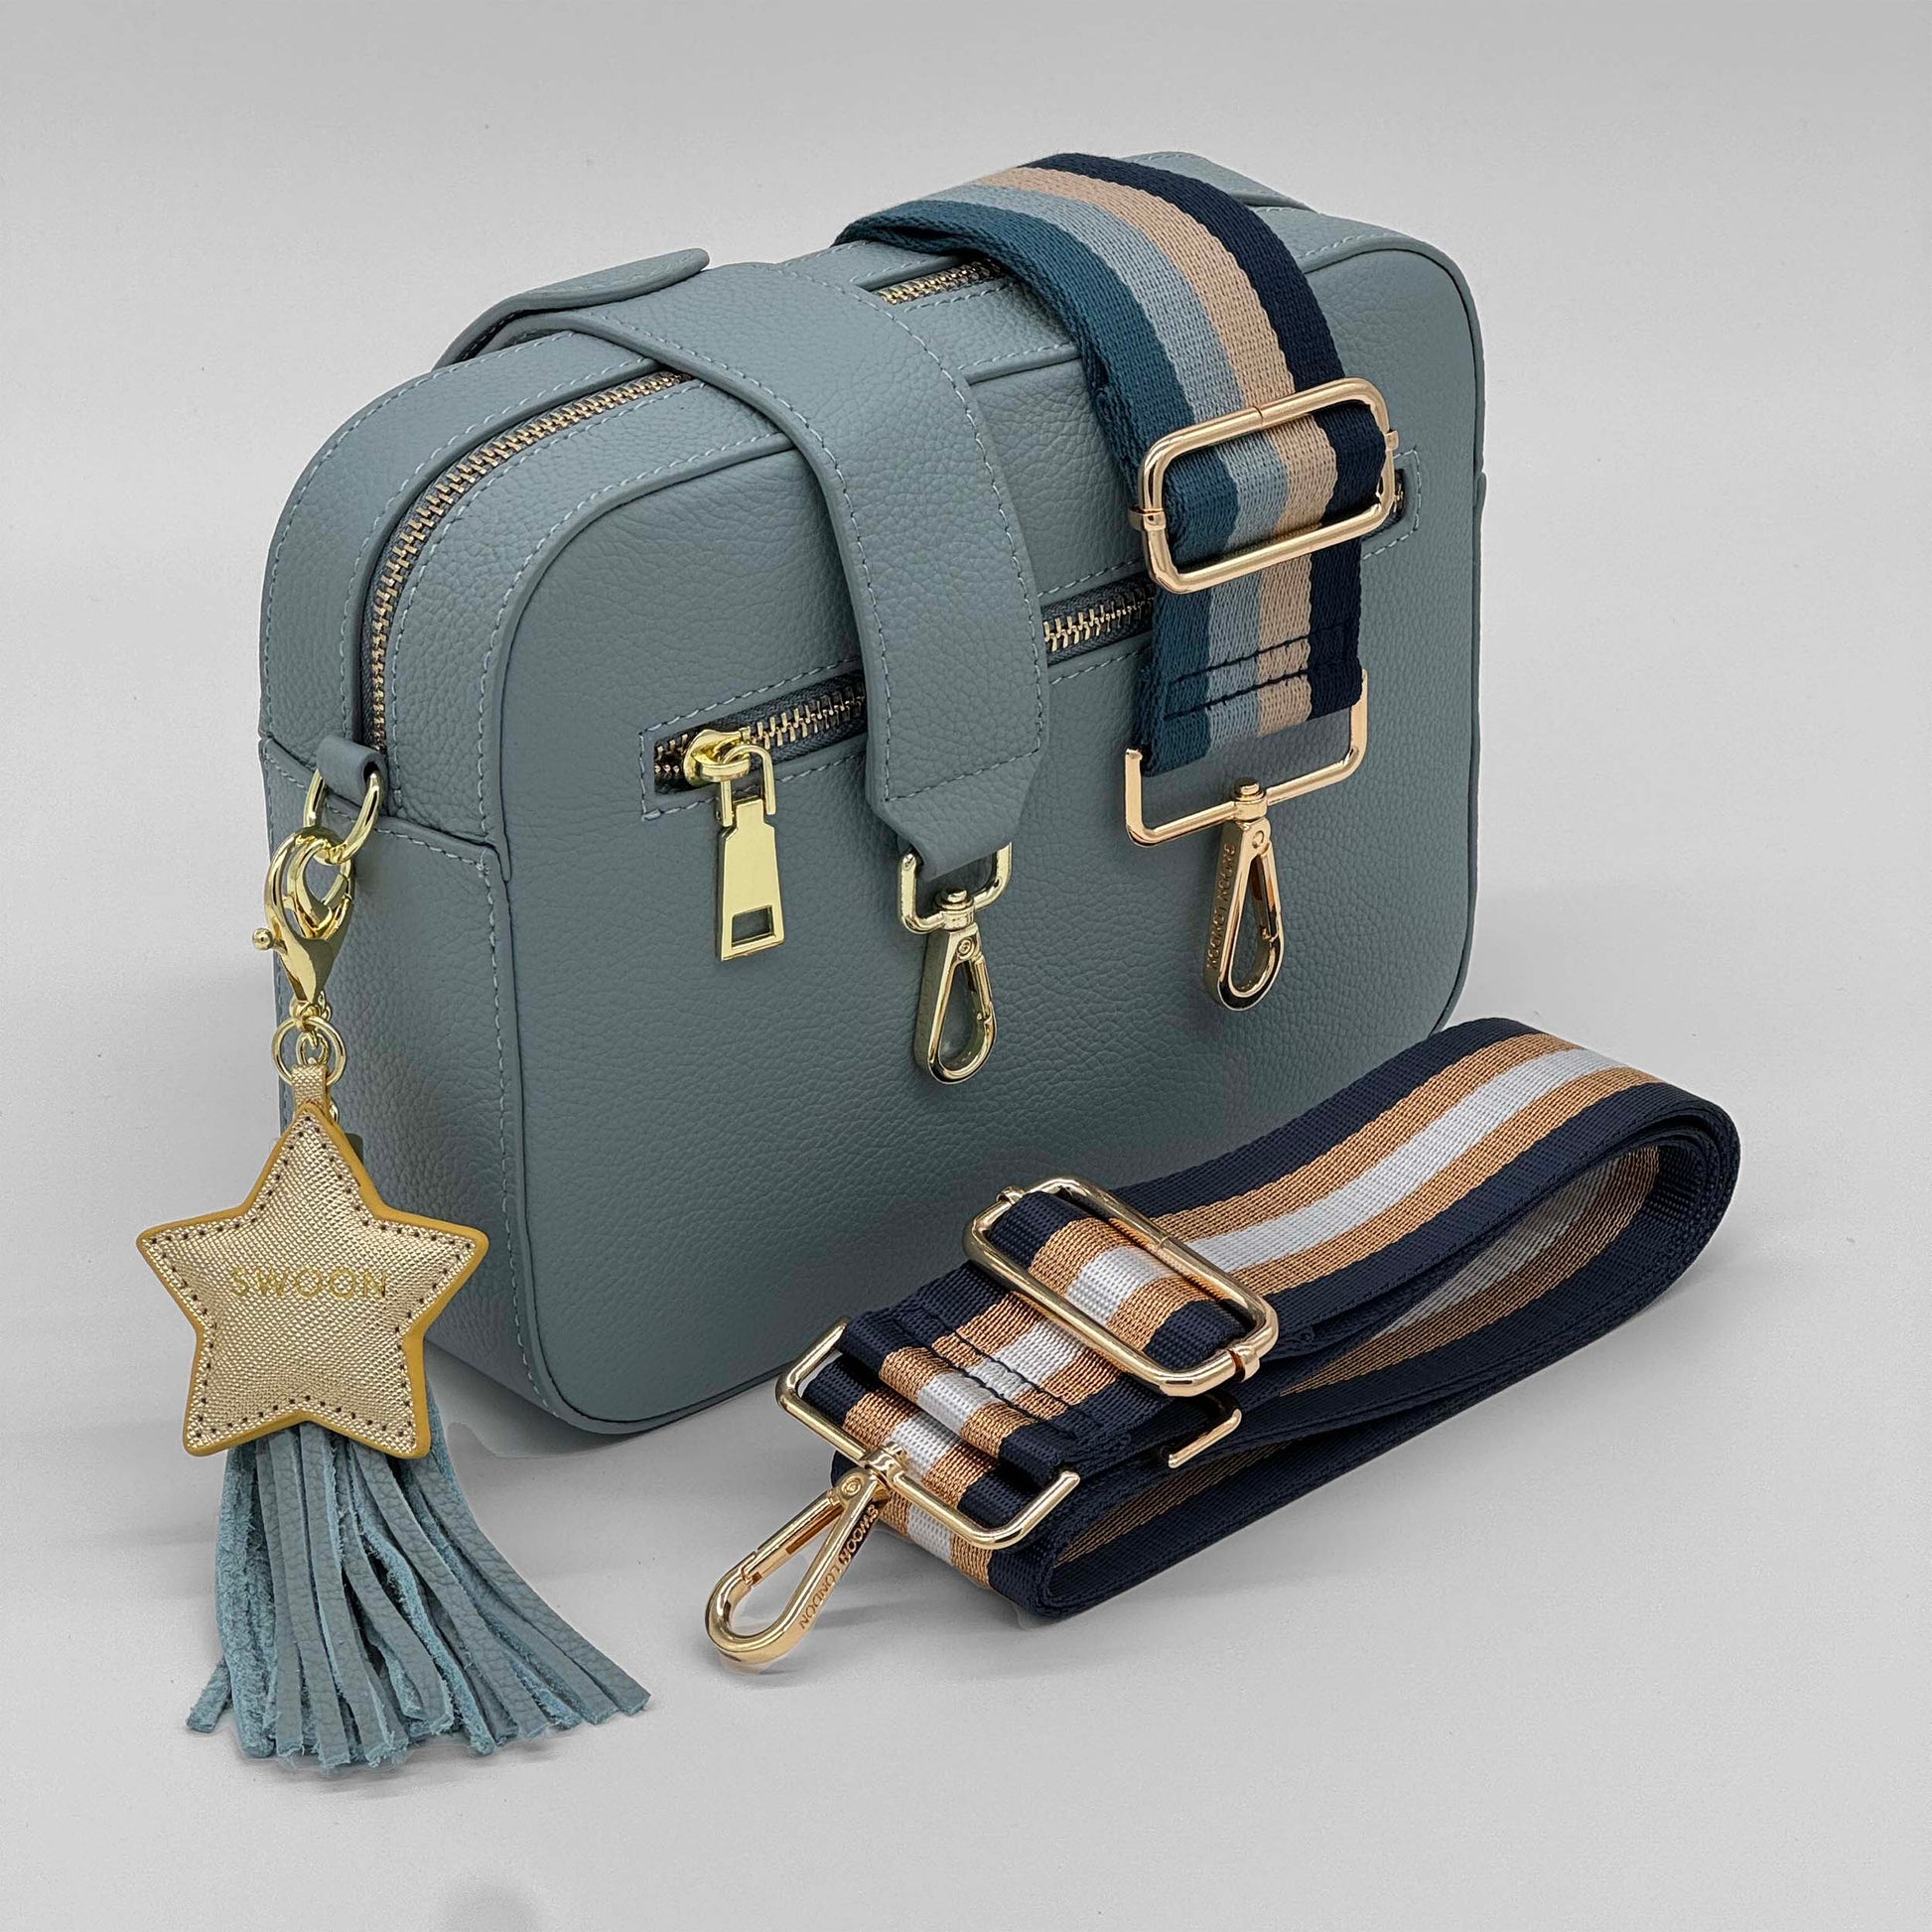 The Neutral Nautical Bag Set by Swoon London